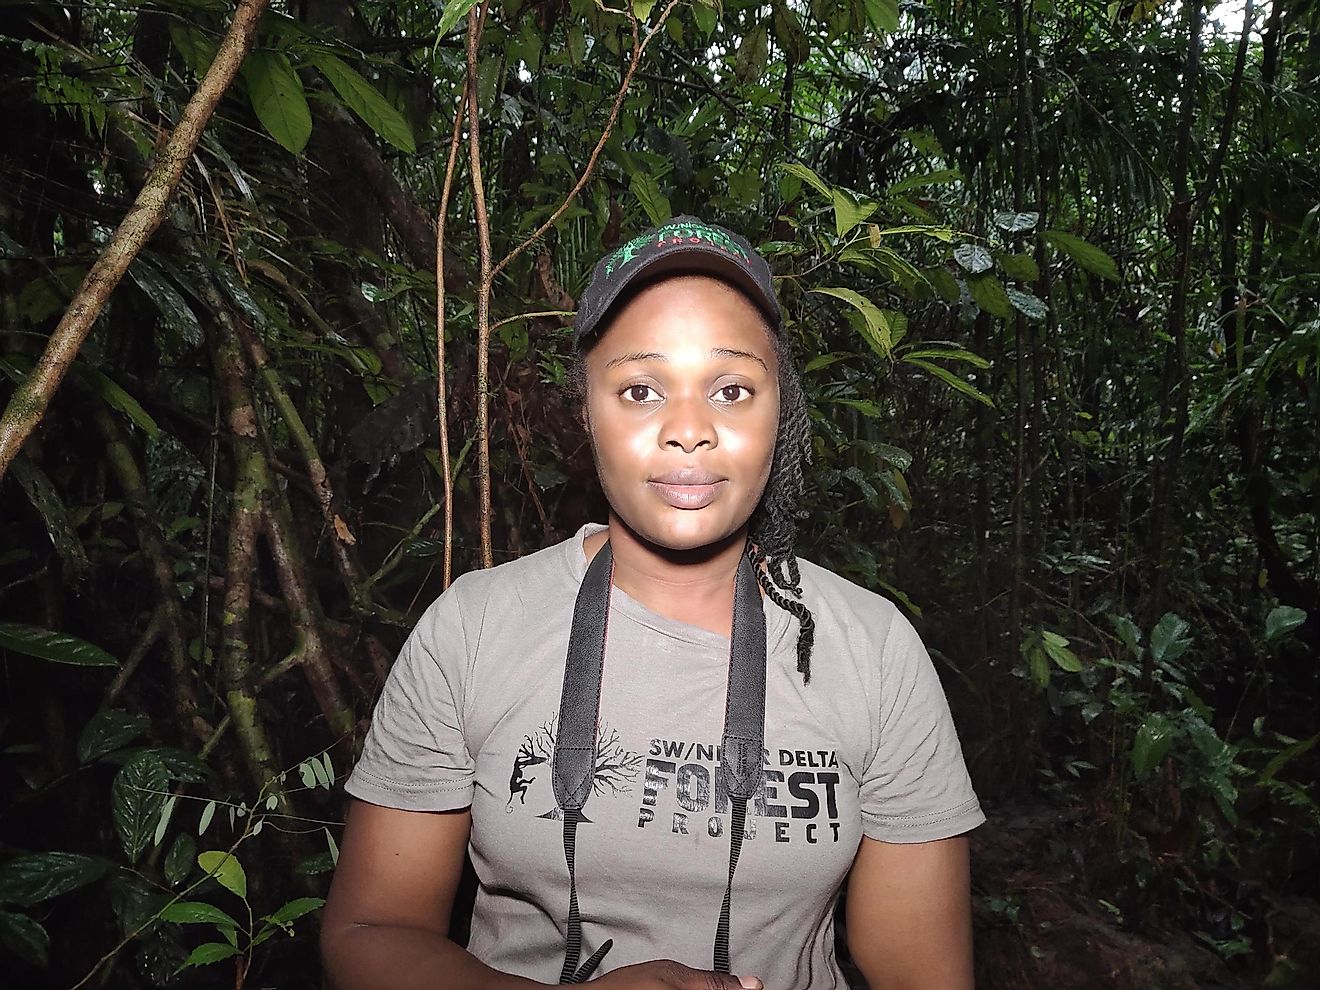 Rachel Ashegbofe Ikemeh, Project Director at SW/Niger Delta Forest Project